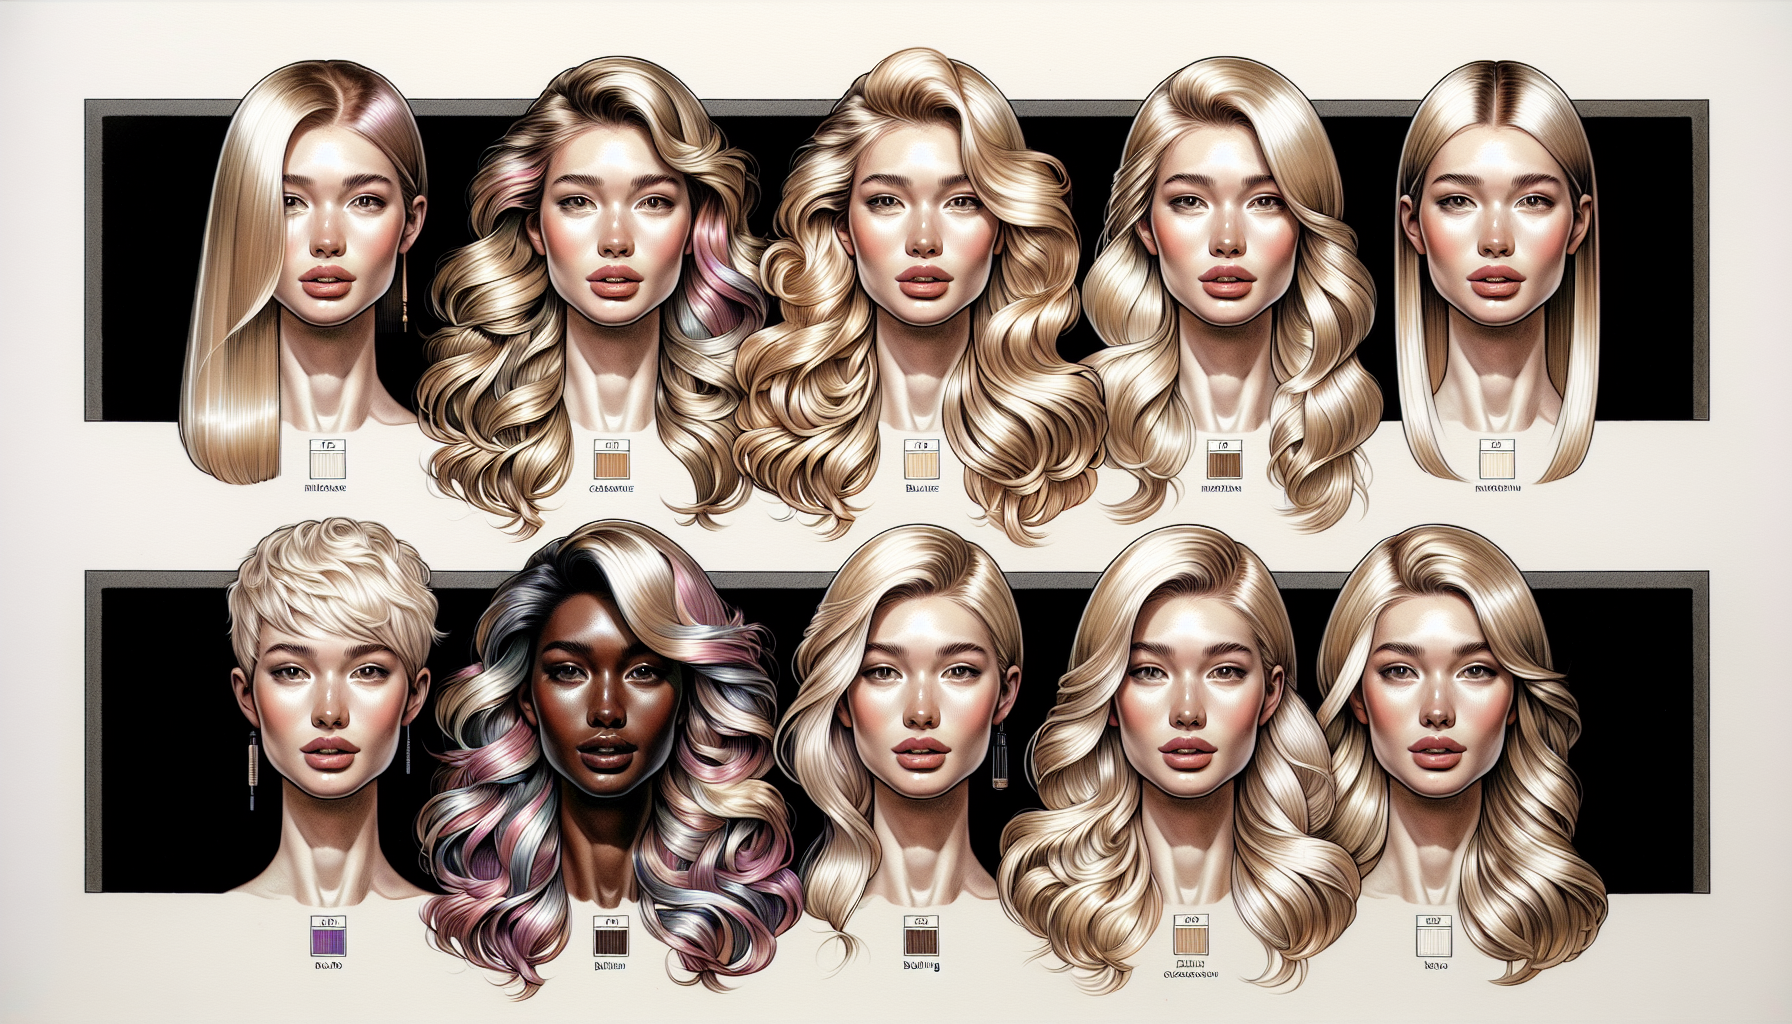 Illustration of balayage, foiling, and babylights hair coloring techniques